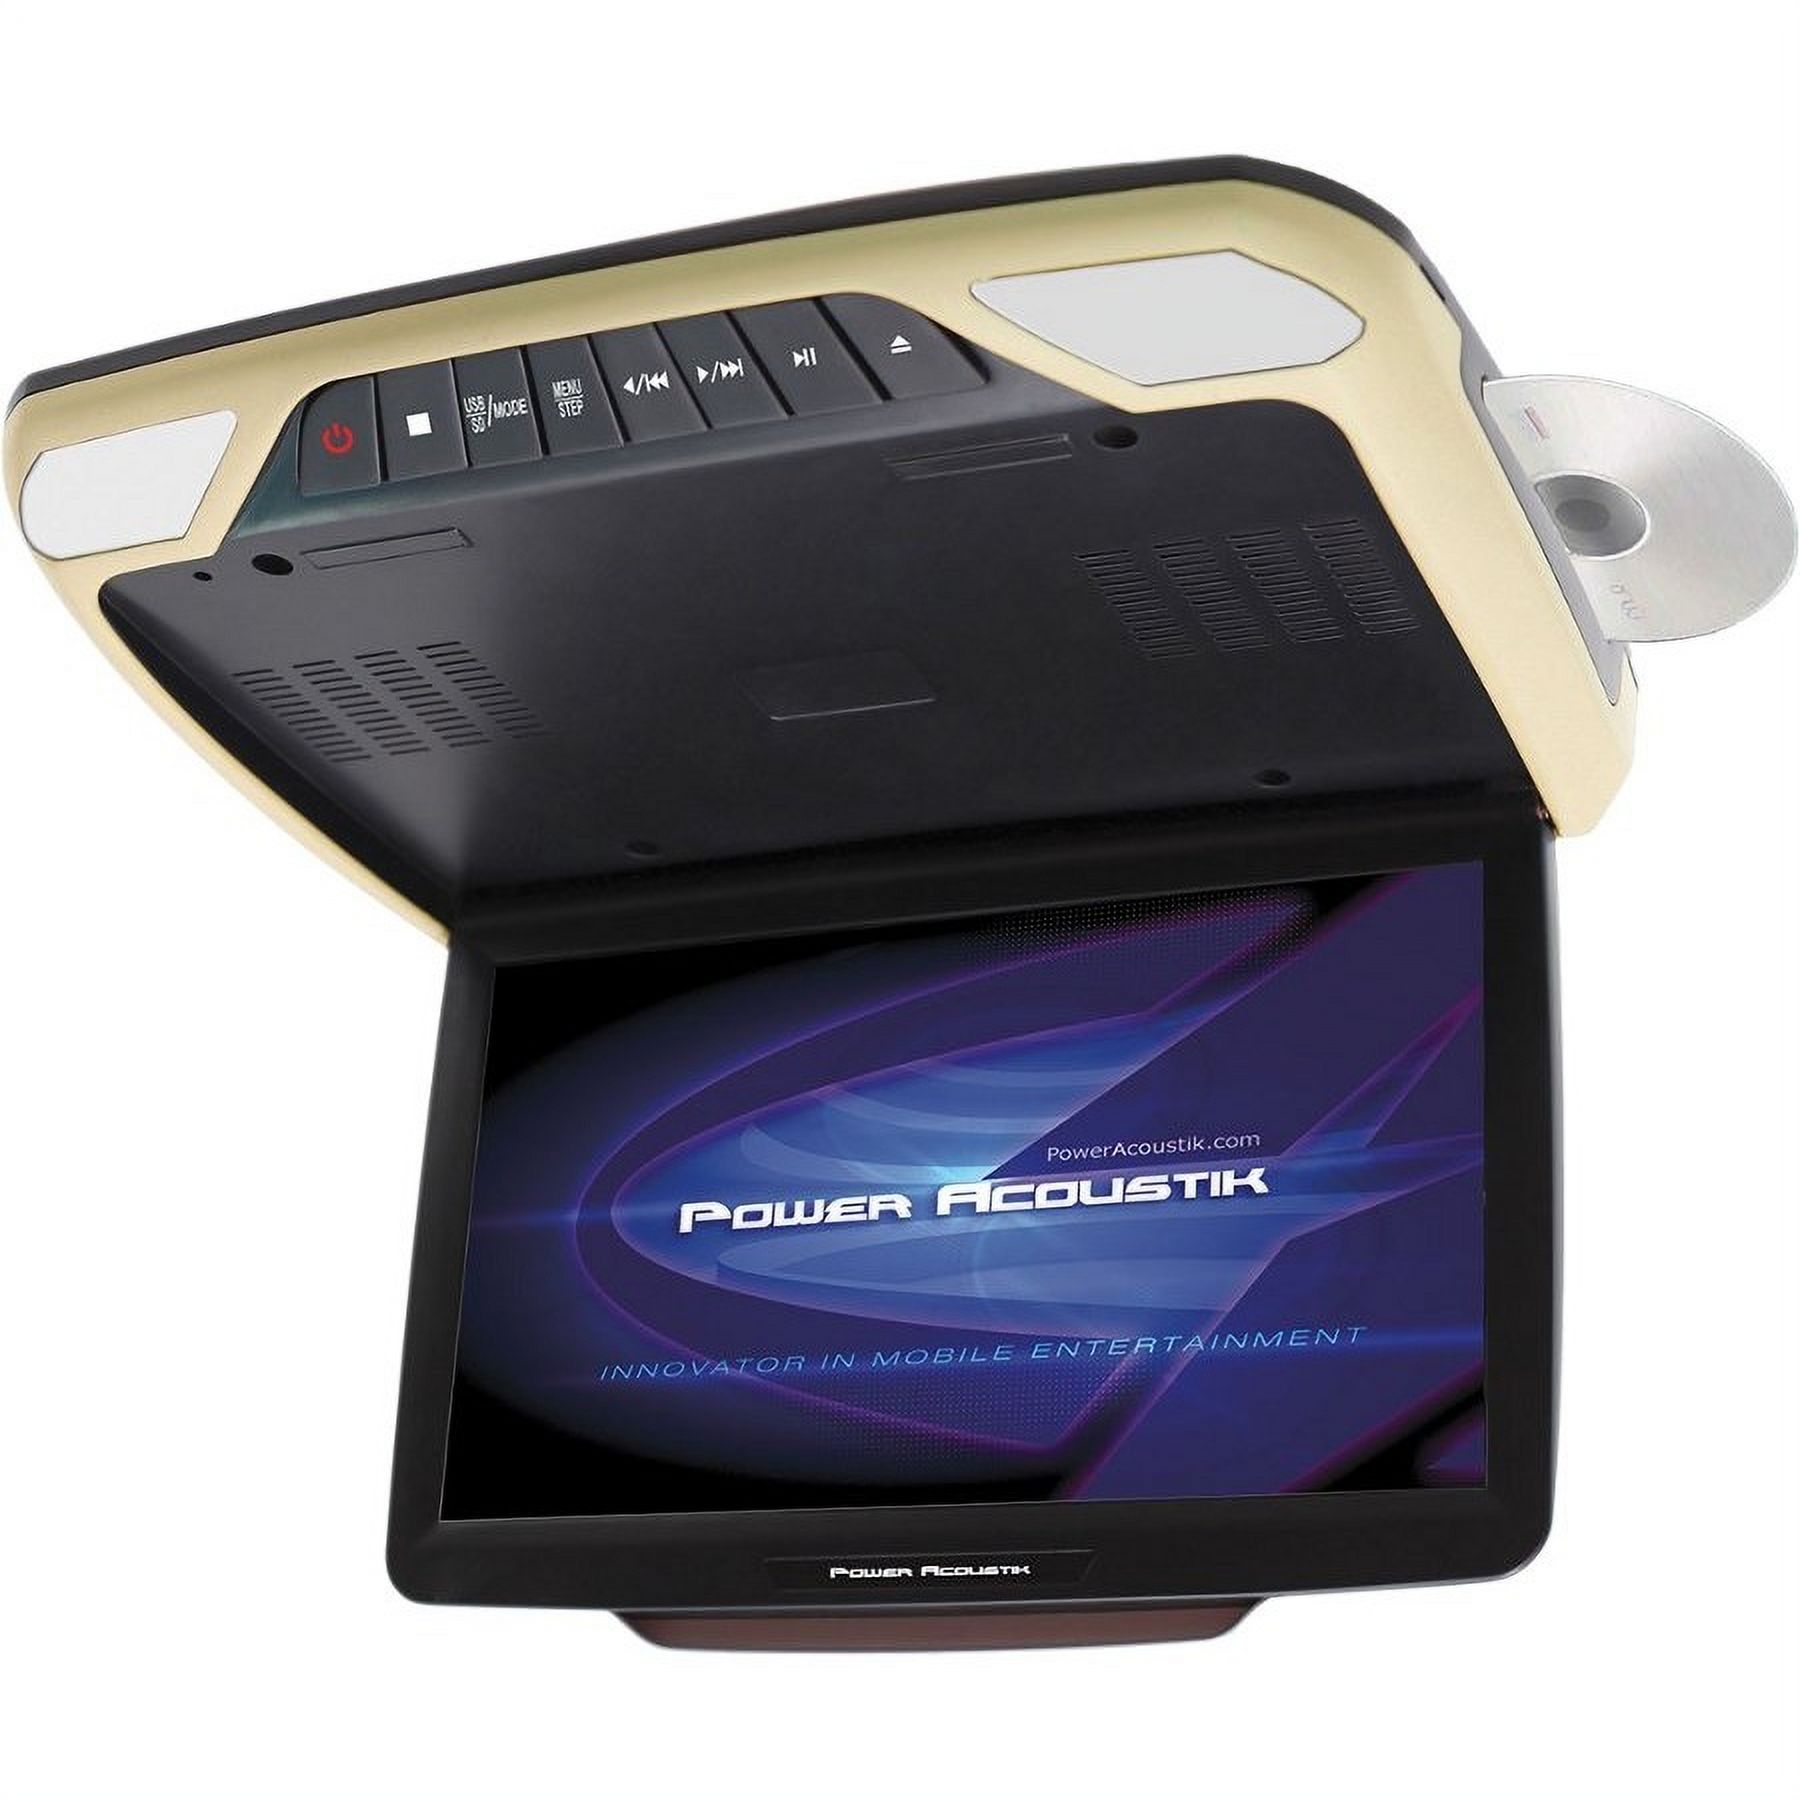 Power Acoustik PMD-143H Car DVD Player, 14.3" LCD, 16:9 - image 2 of 3